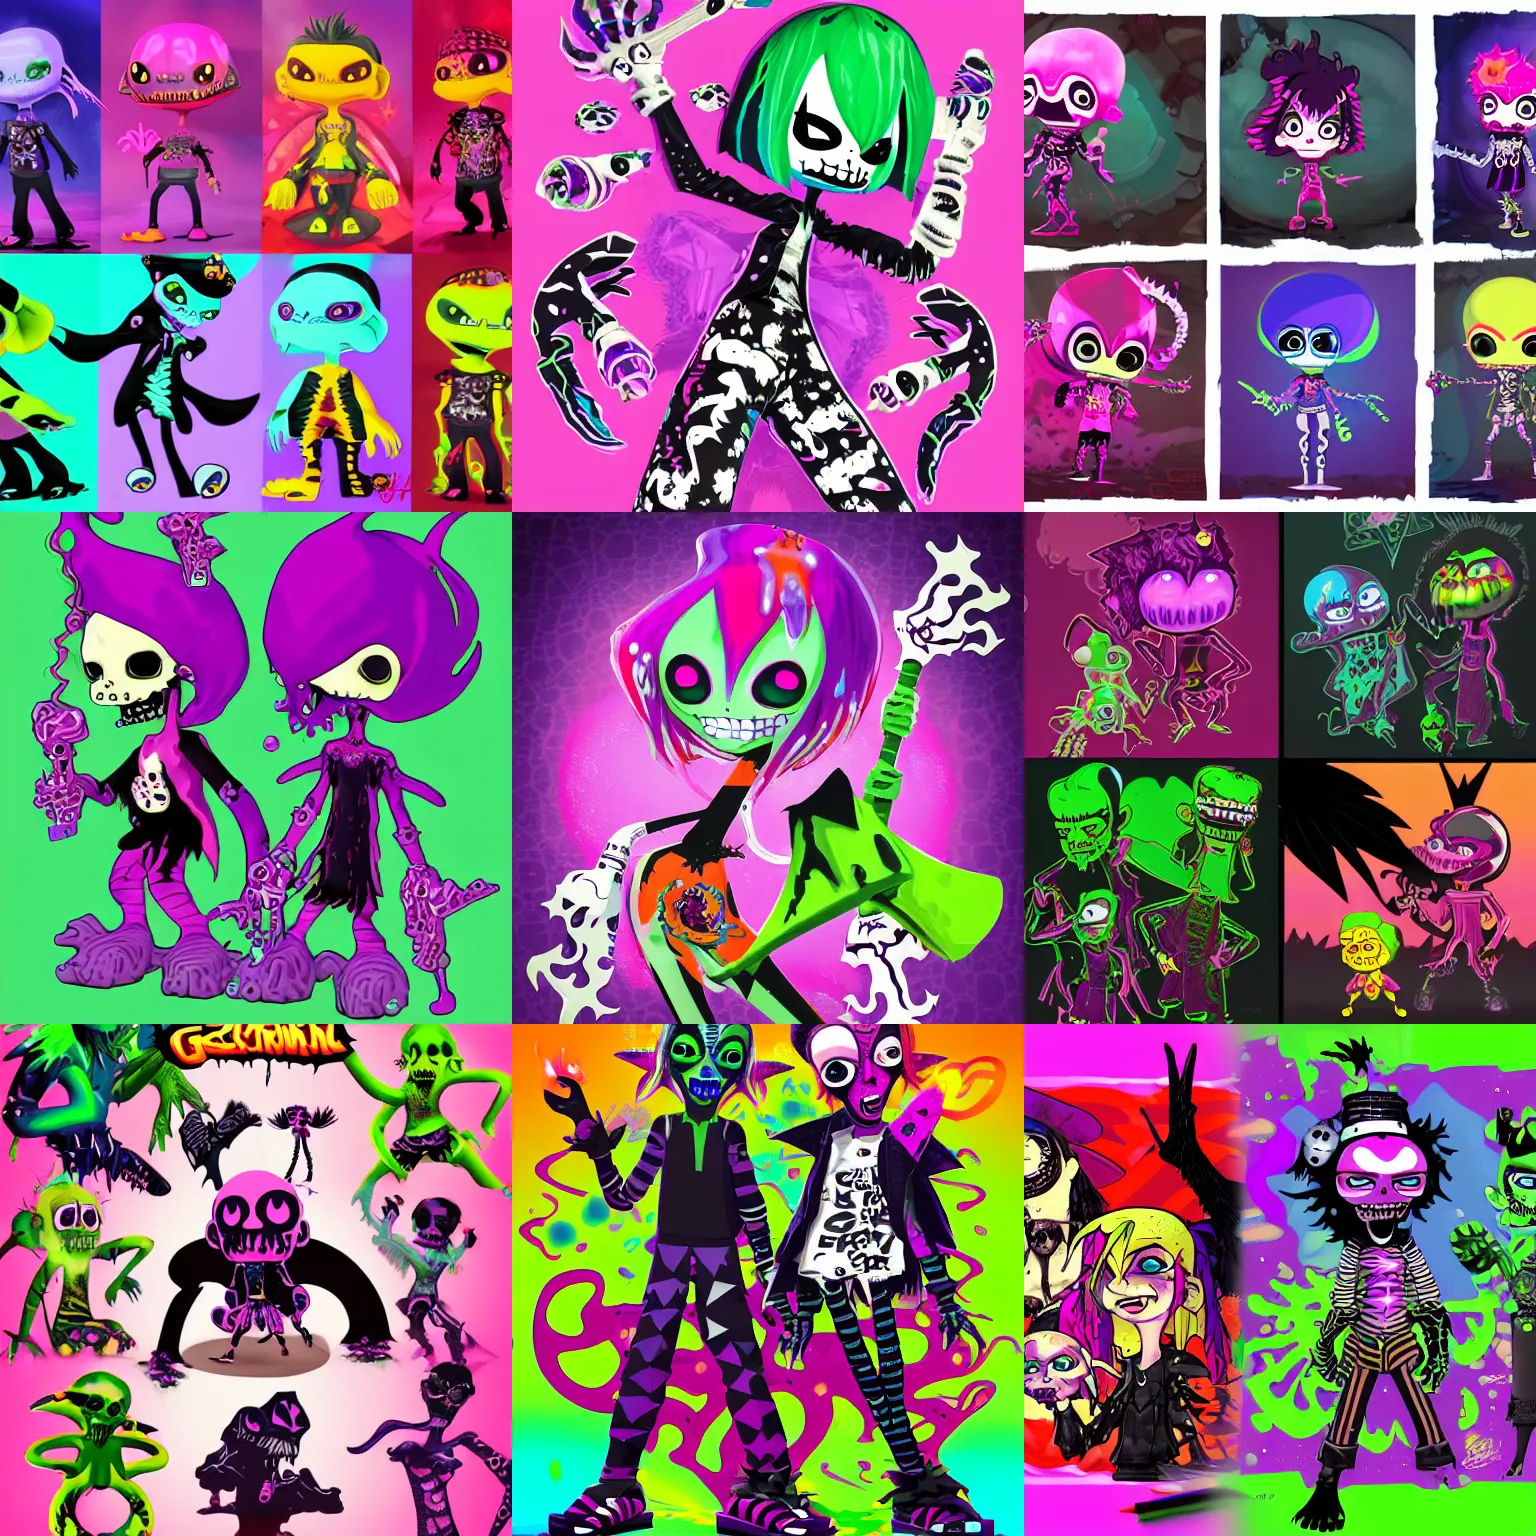 Prompt: CGI lisa frank gothic punk toxic glow in the dark bones vampiric rockstar vampire squid concept character designs of various shapes and sizes by genndy tartakovsky and the creators of fret nice at pieces interactive and splatoon by nintendo for the new psychonauts game by doublefines tim shafer being overseen by Jamie Hewlett from gorillaz